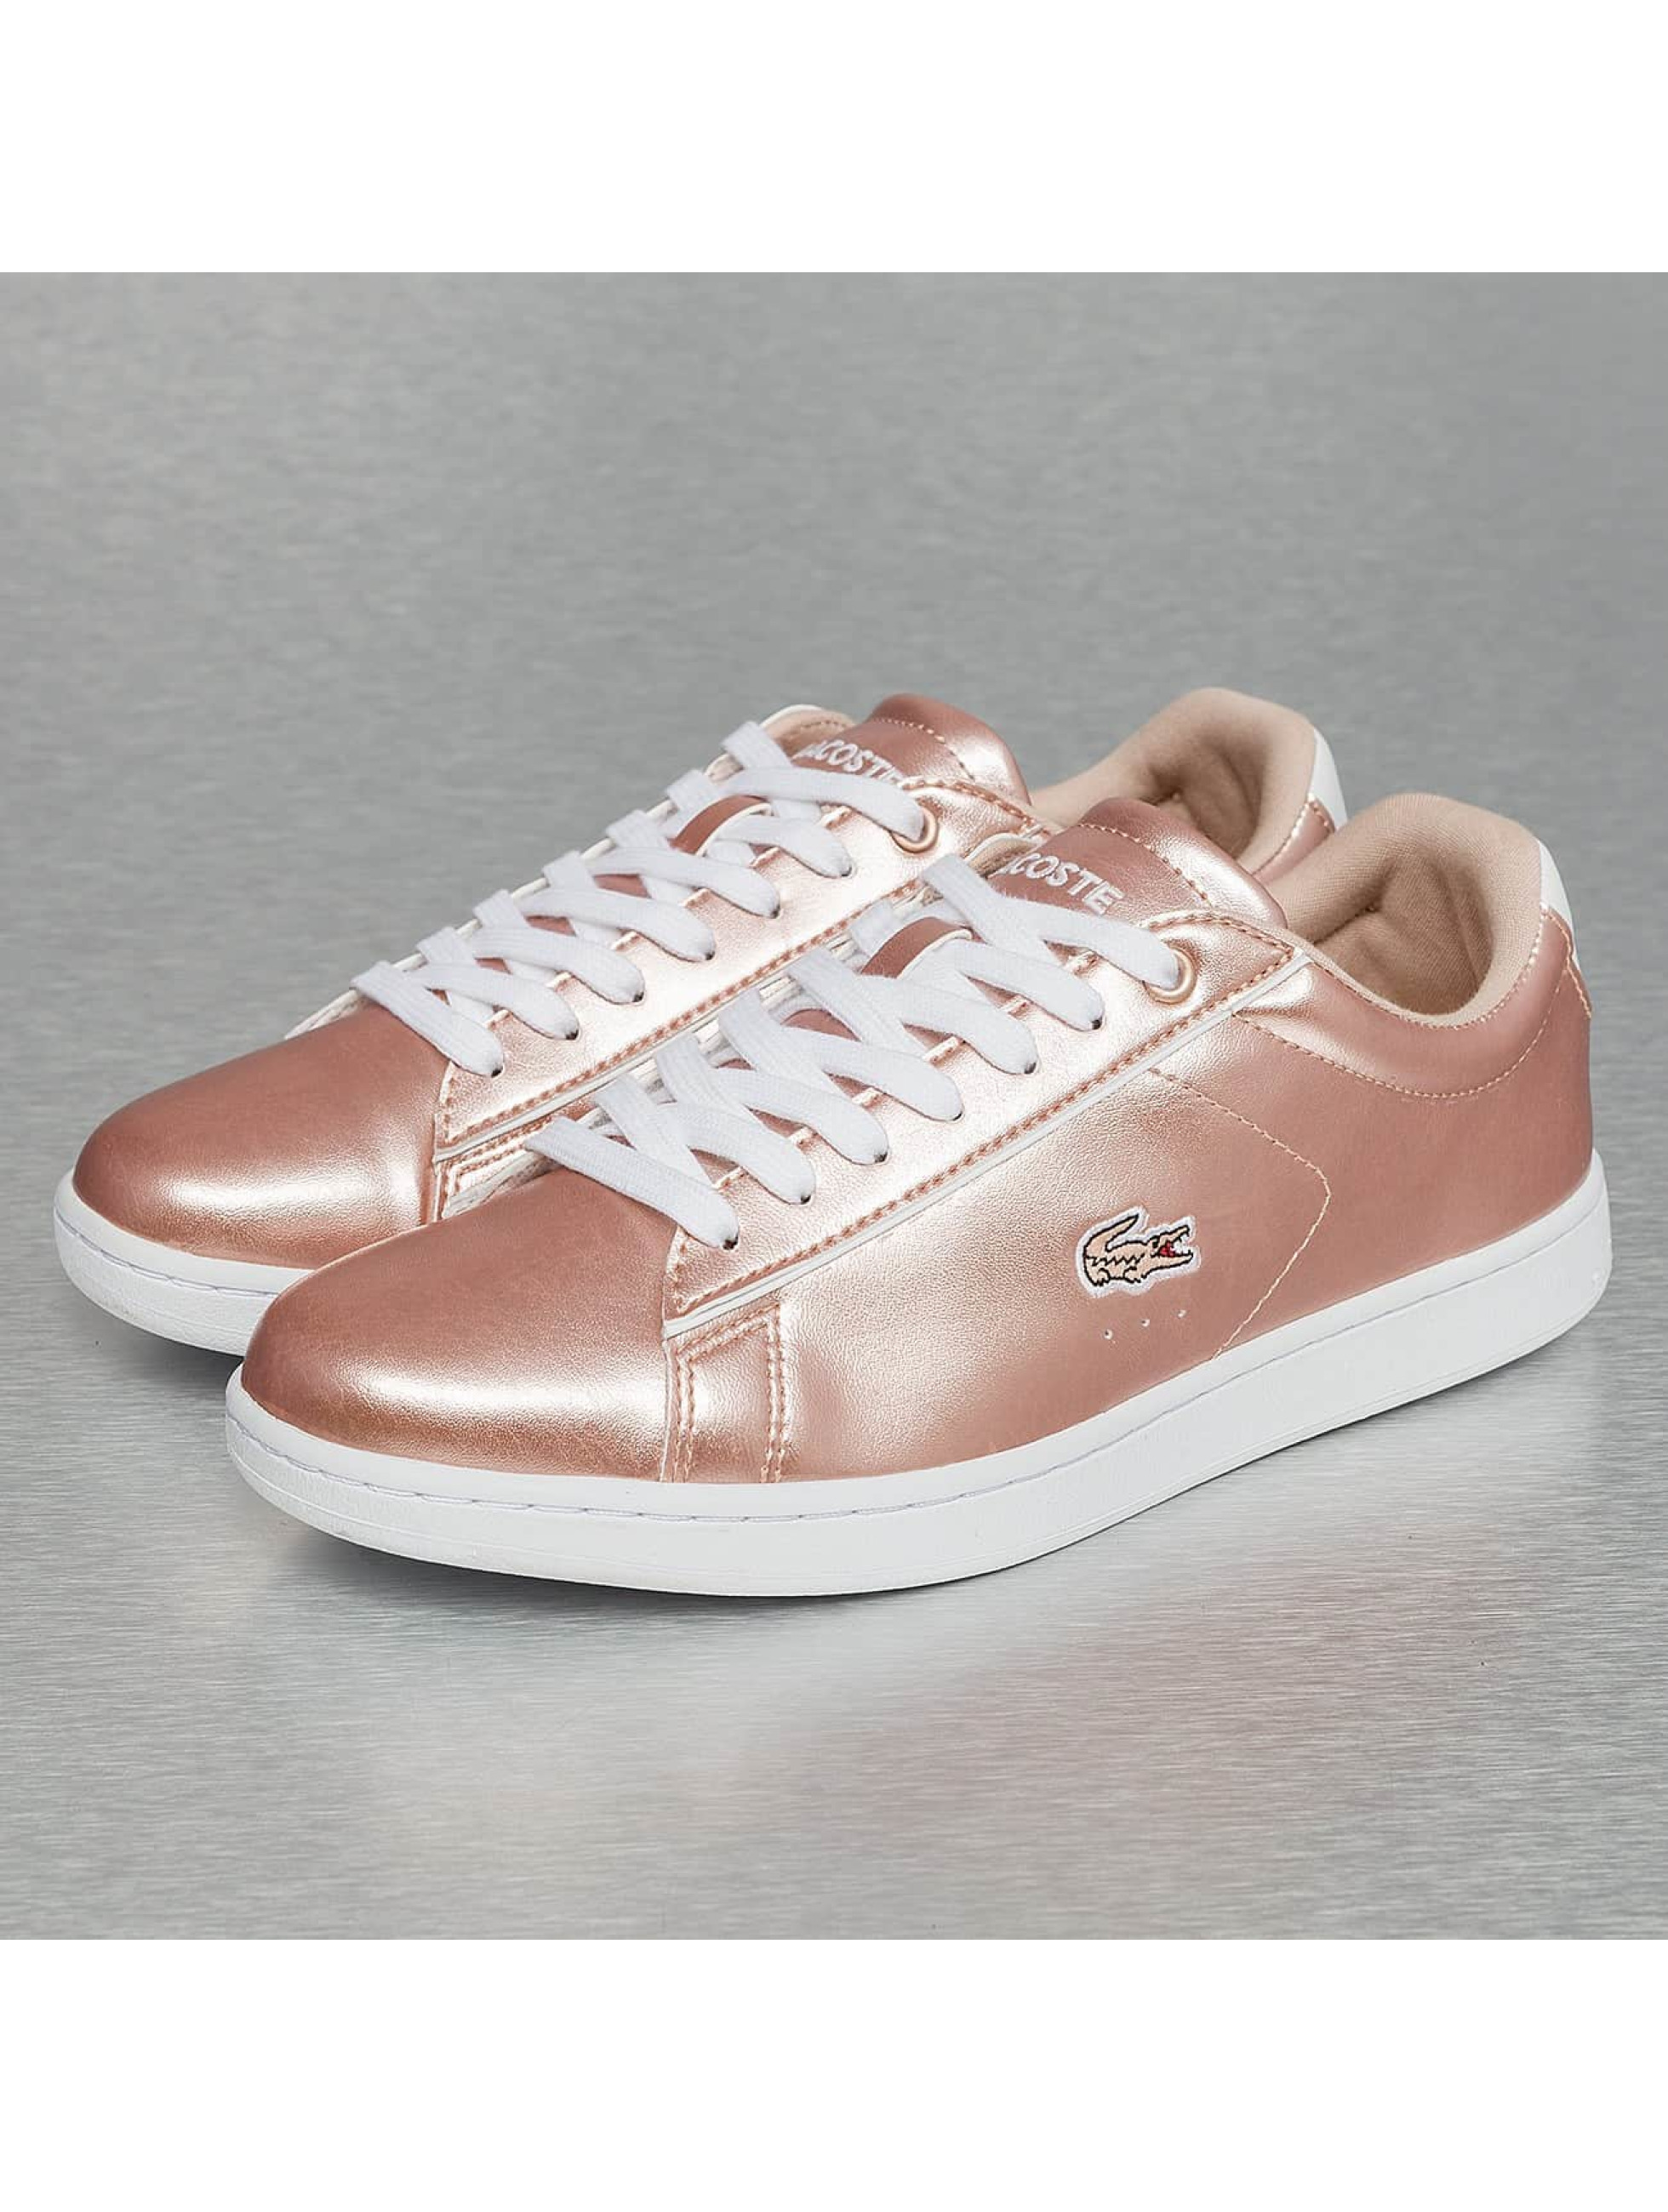 Lacoste Chaussures / Baskets Carnaby EVO 316 SPW en magenta